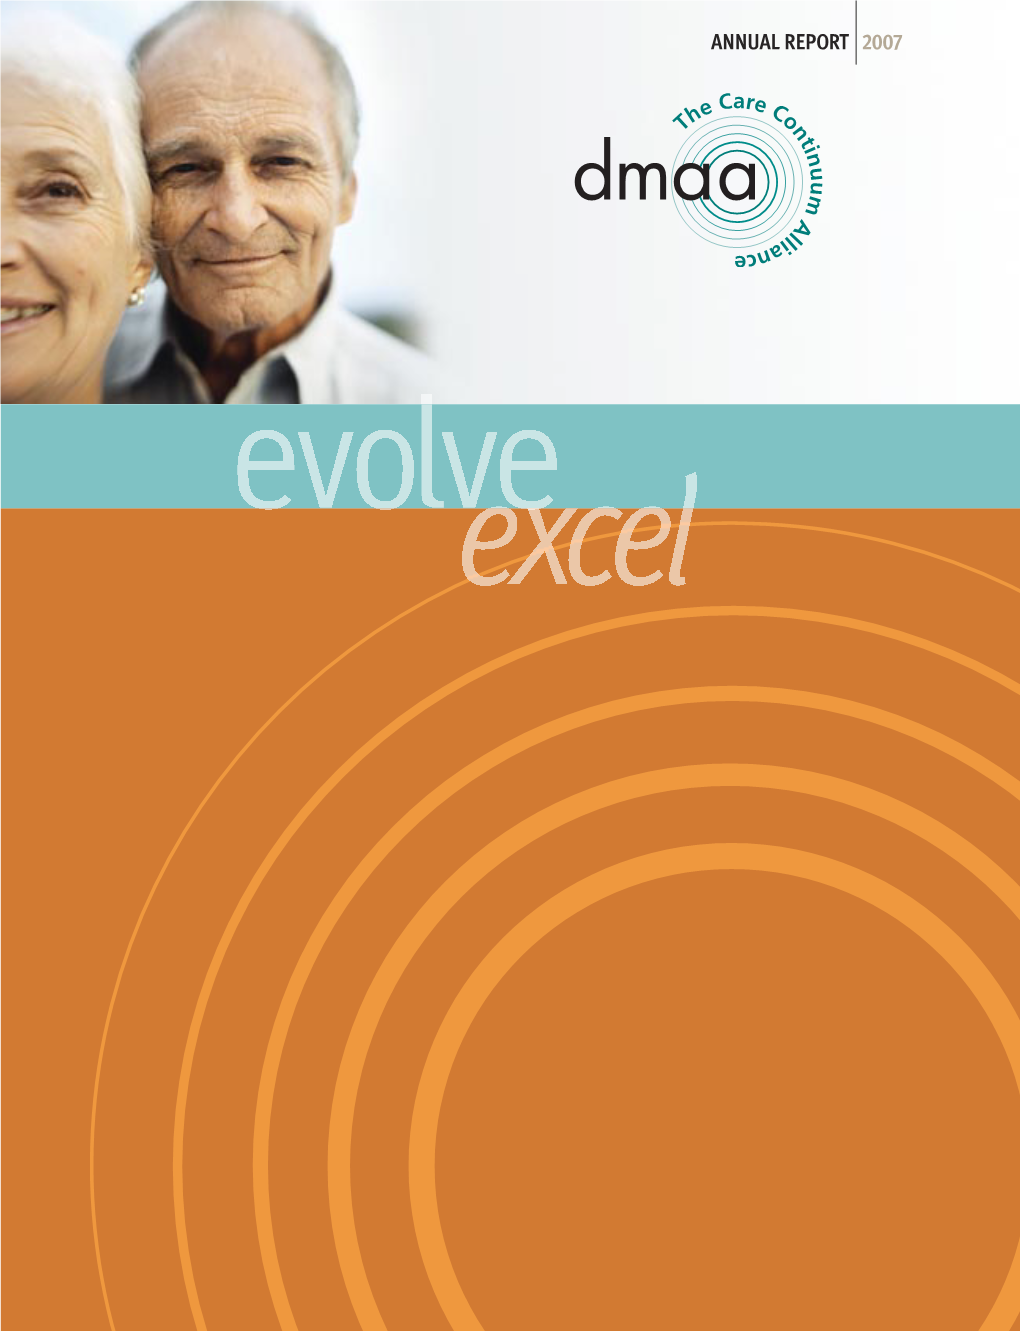 ANNUAL REPORT 2007 About DMAA